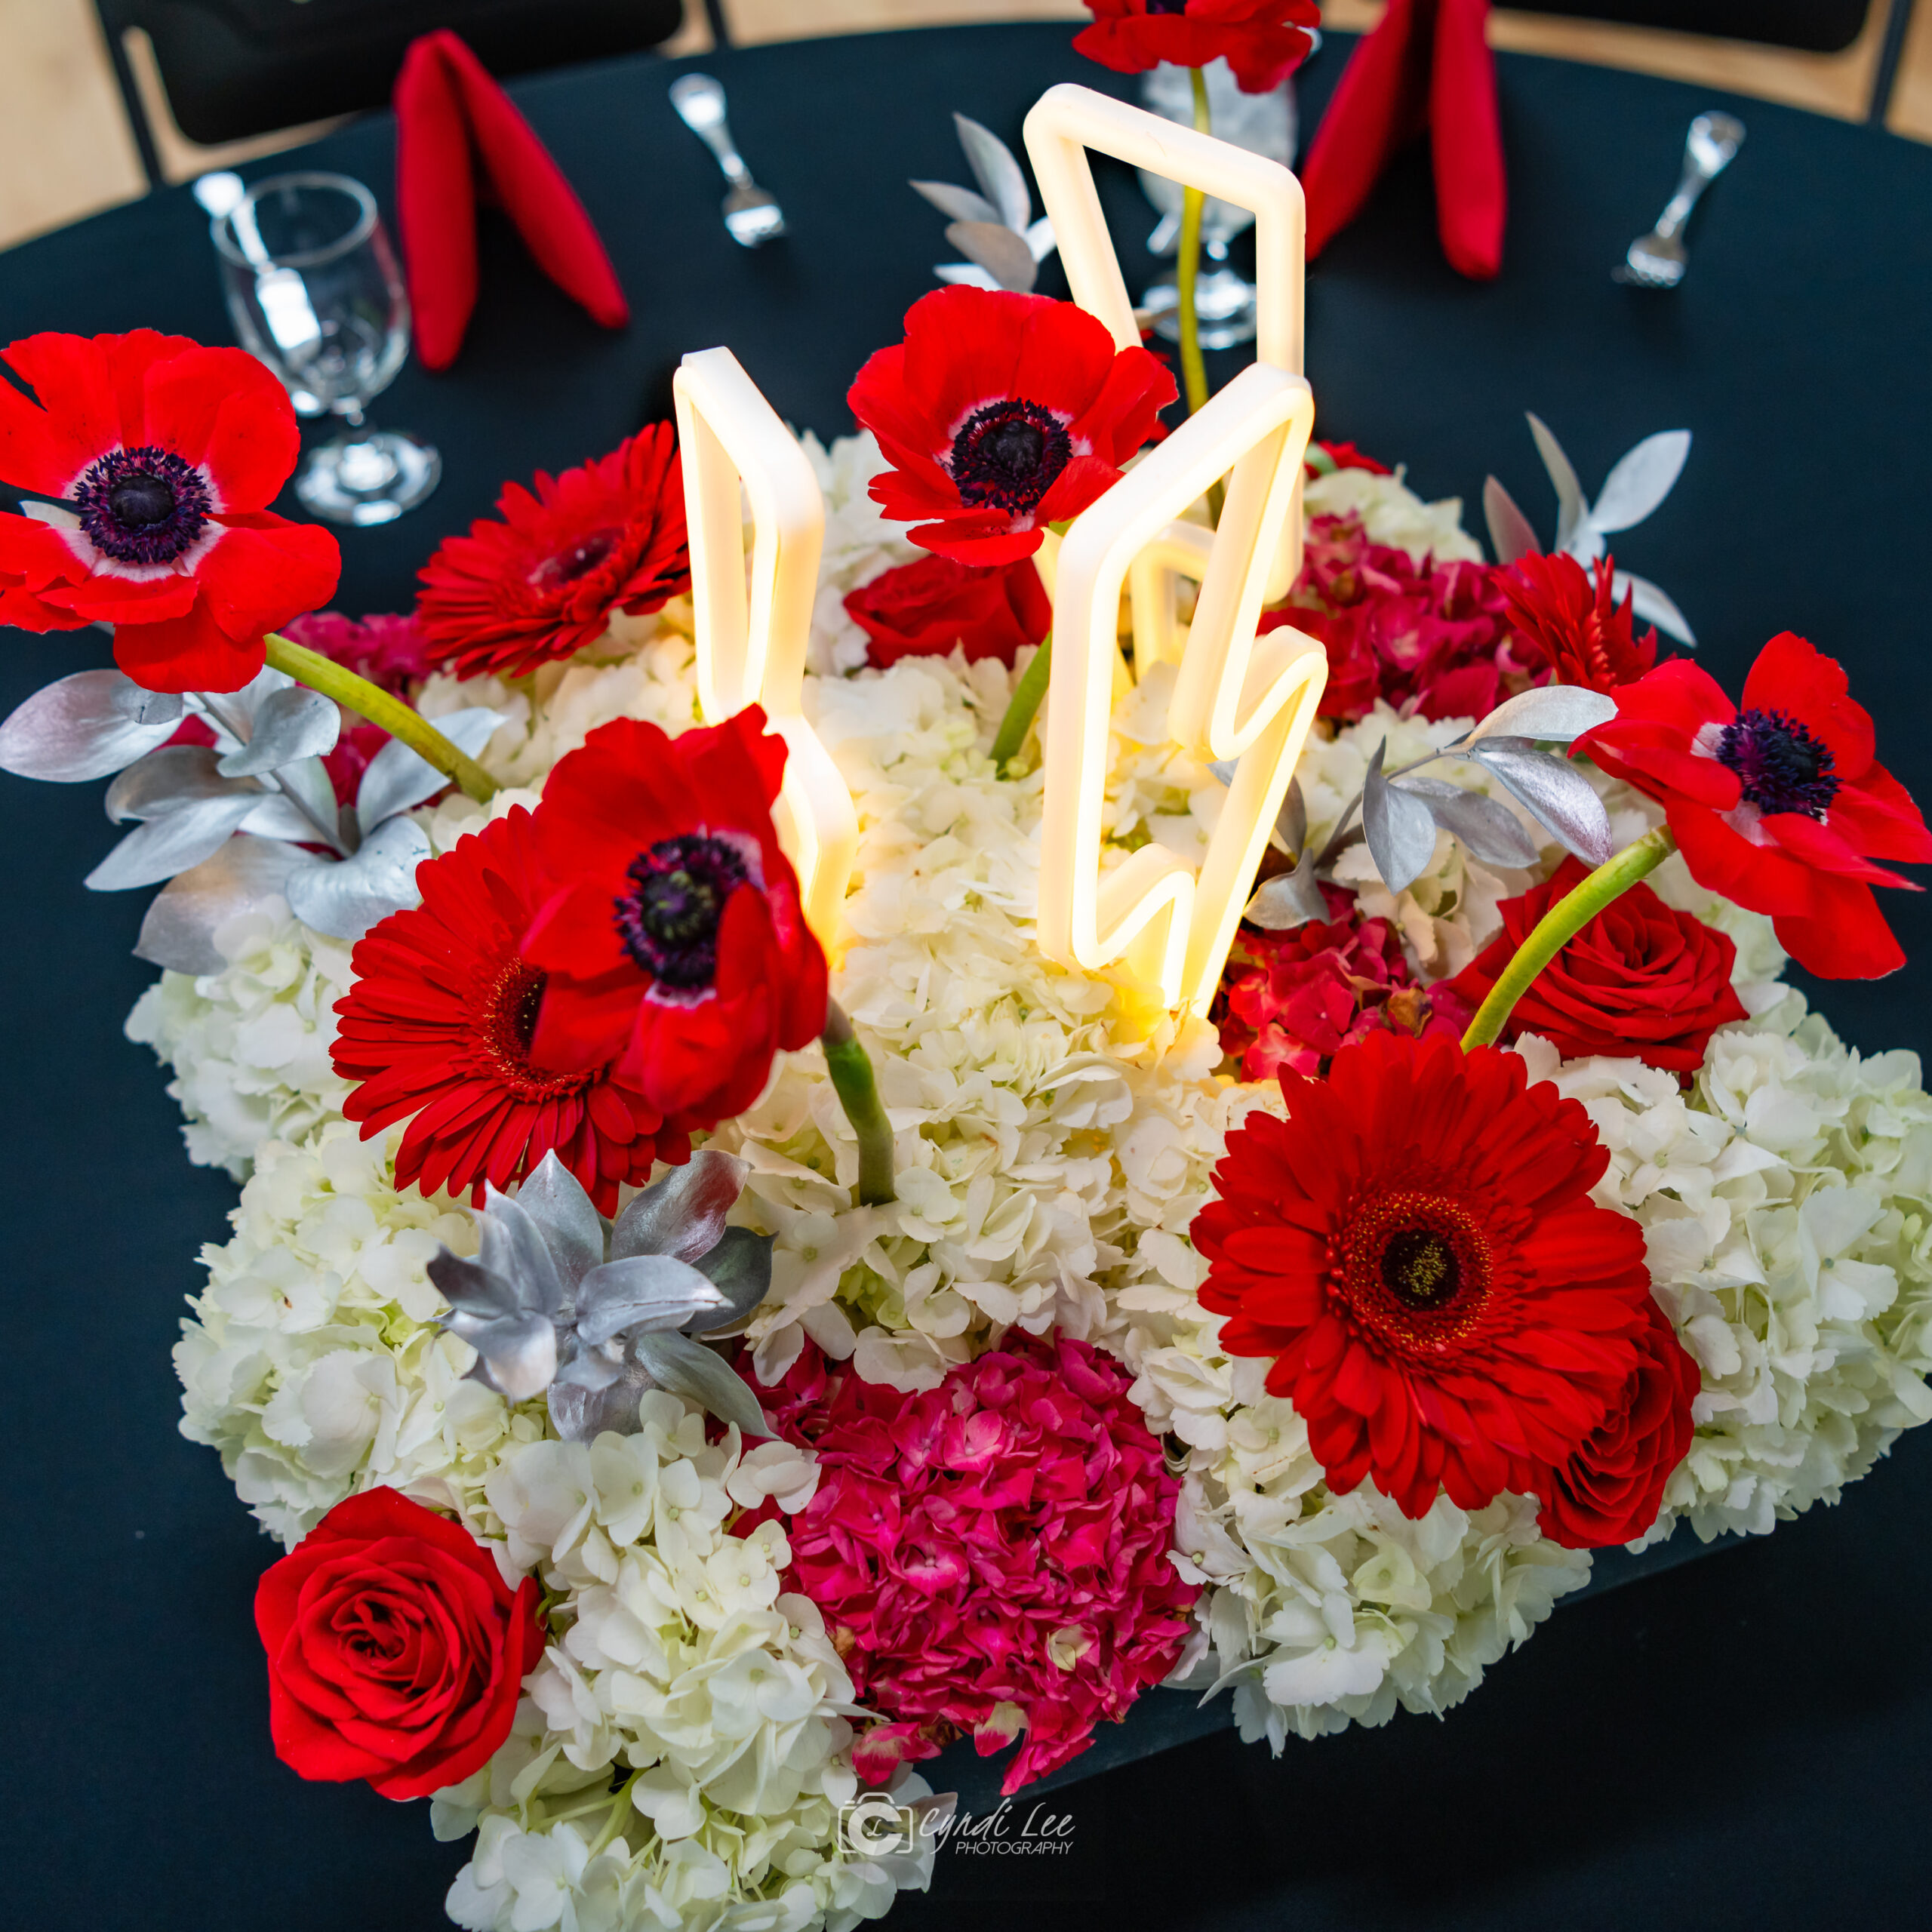 Centerpieces at James's Electric Casino Bar Mitzvah Party at Temple Rodef Shalom in Falls Church, VA | Pop Color Events | Adding a Pop of Color to Bar & Bat Mitzvahs in DC, MD & VA | Photo by: Cyndi Lee Photography